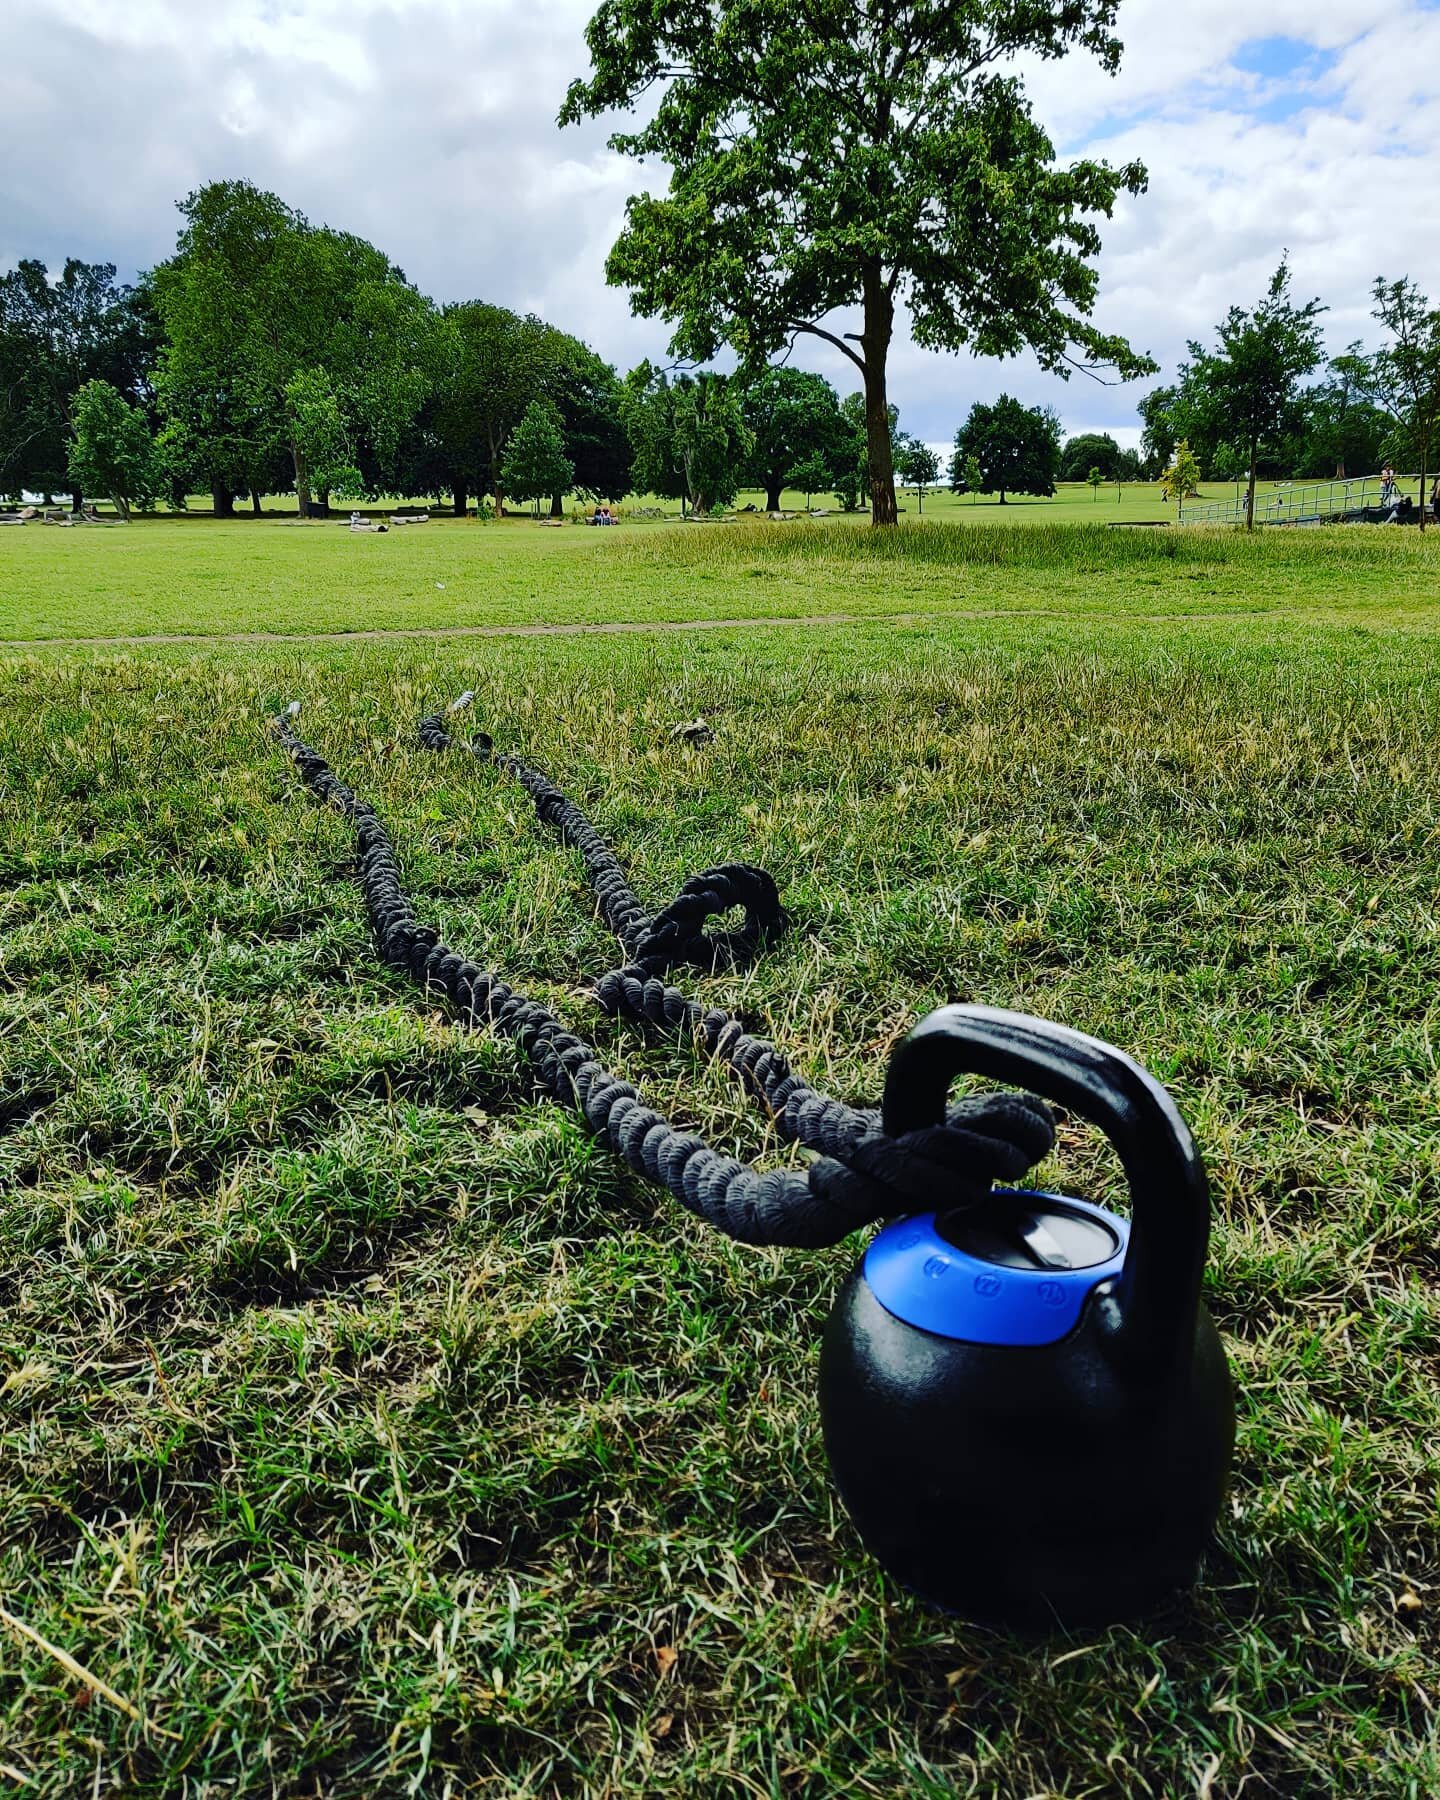 Perfect combination for a horrendously awesome training session. Who doesn't lovely kettlebells and battelropes?! 🤷🏻&zwj;♀️💪
#personaltrainer #outdoors #training #kettlebell #battleropesworkout